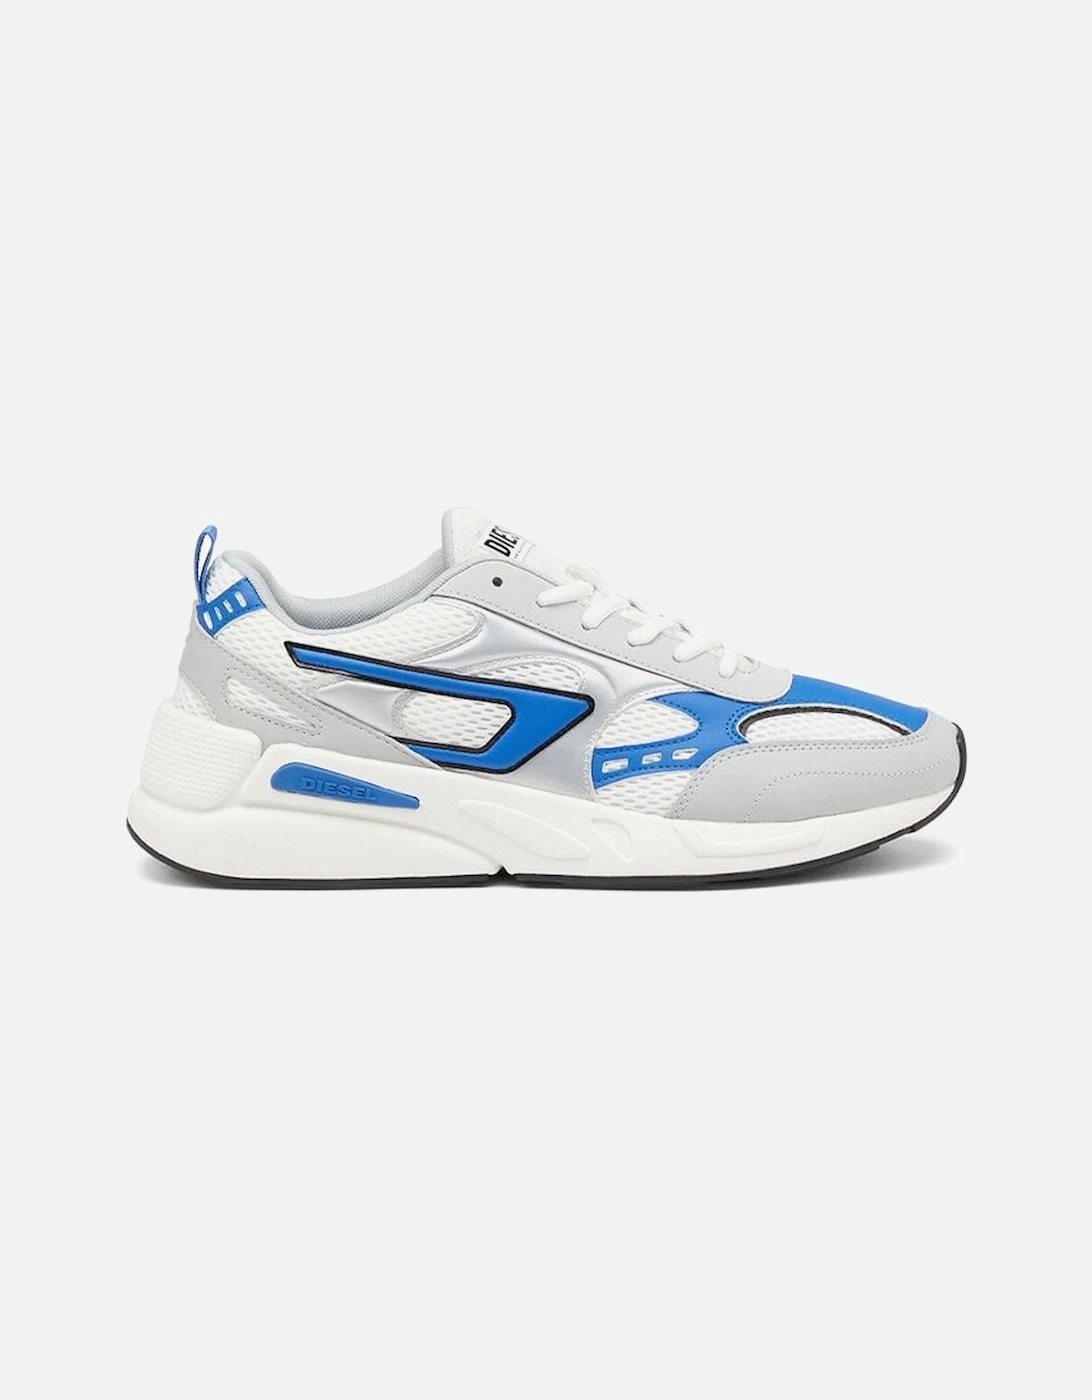 Serendipity Mesh/Suede White/Blue Trainers